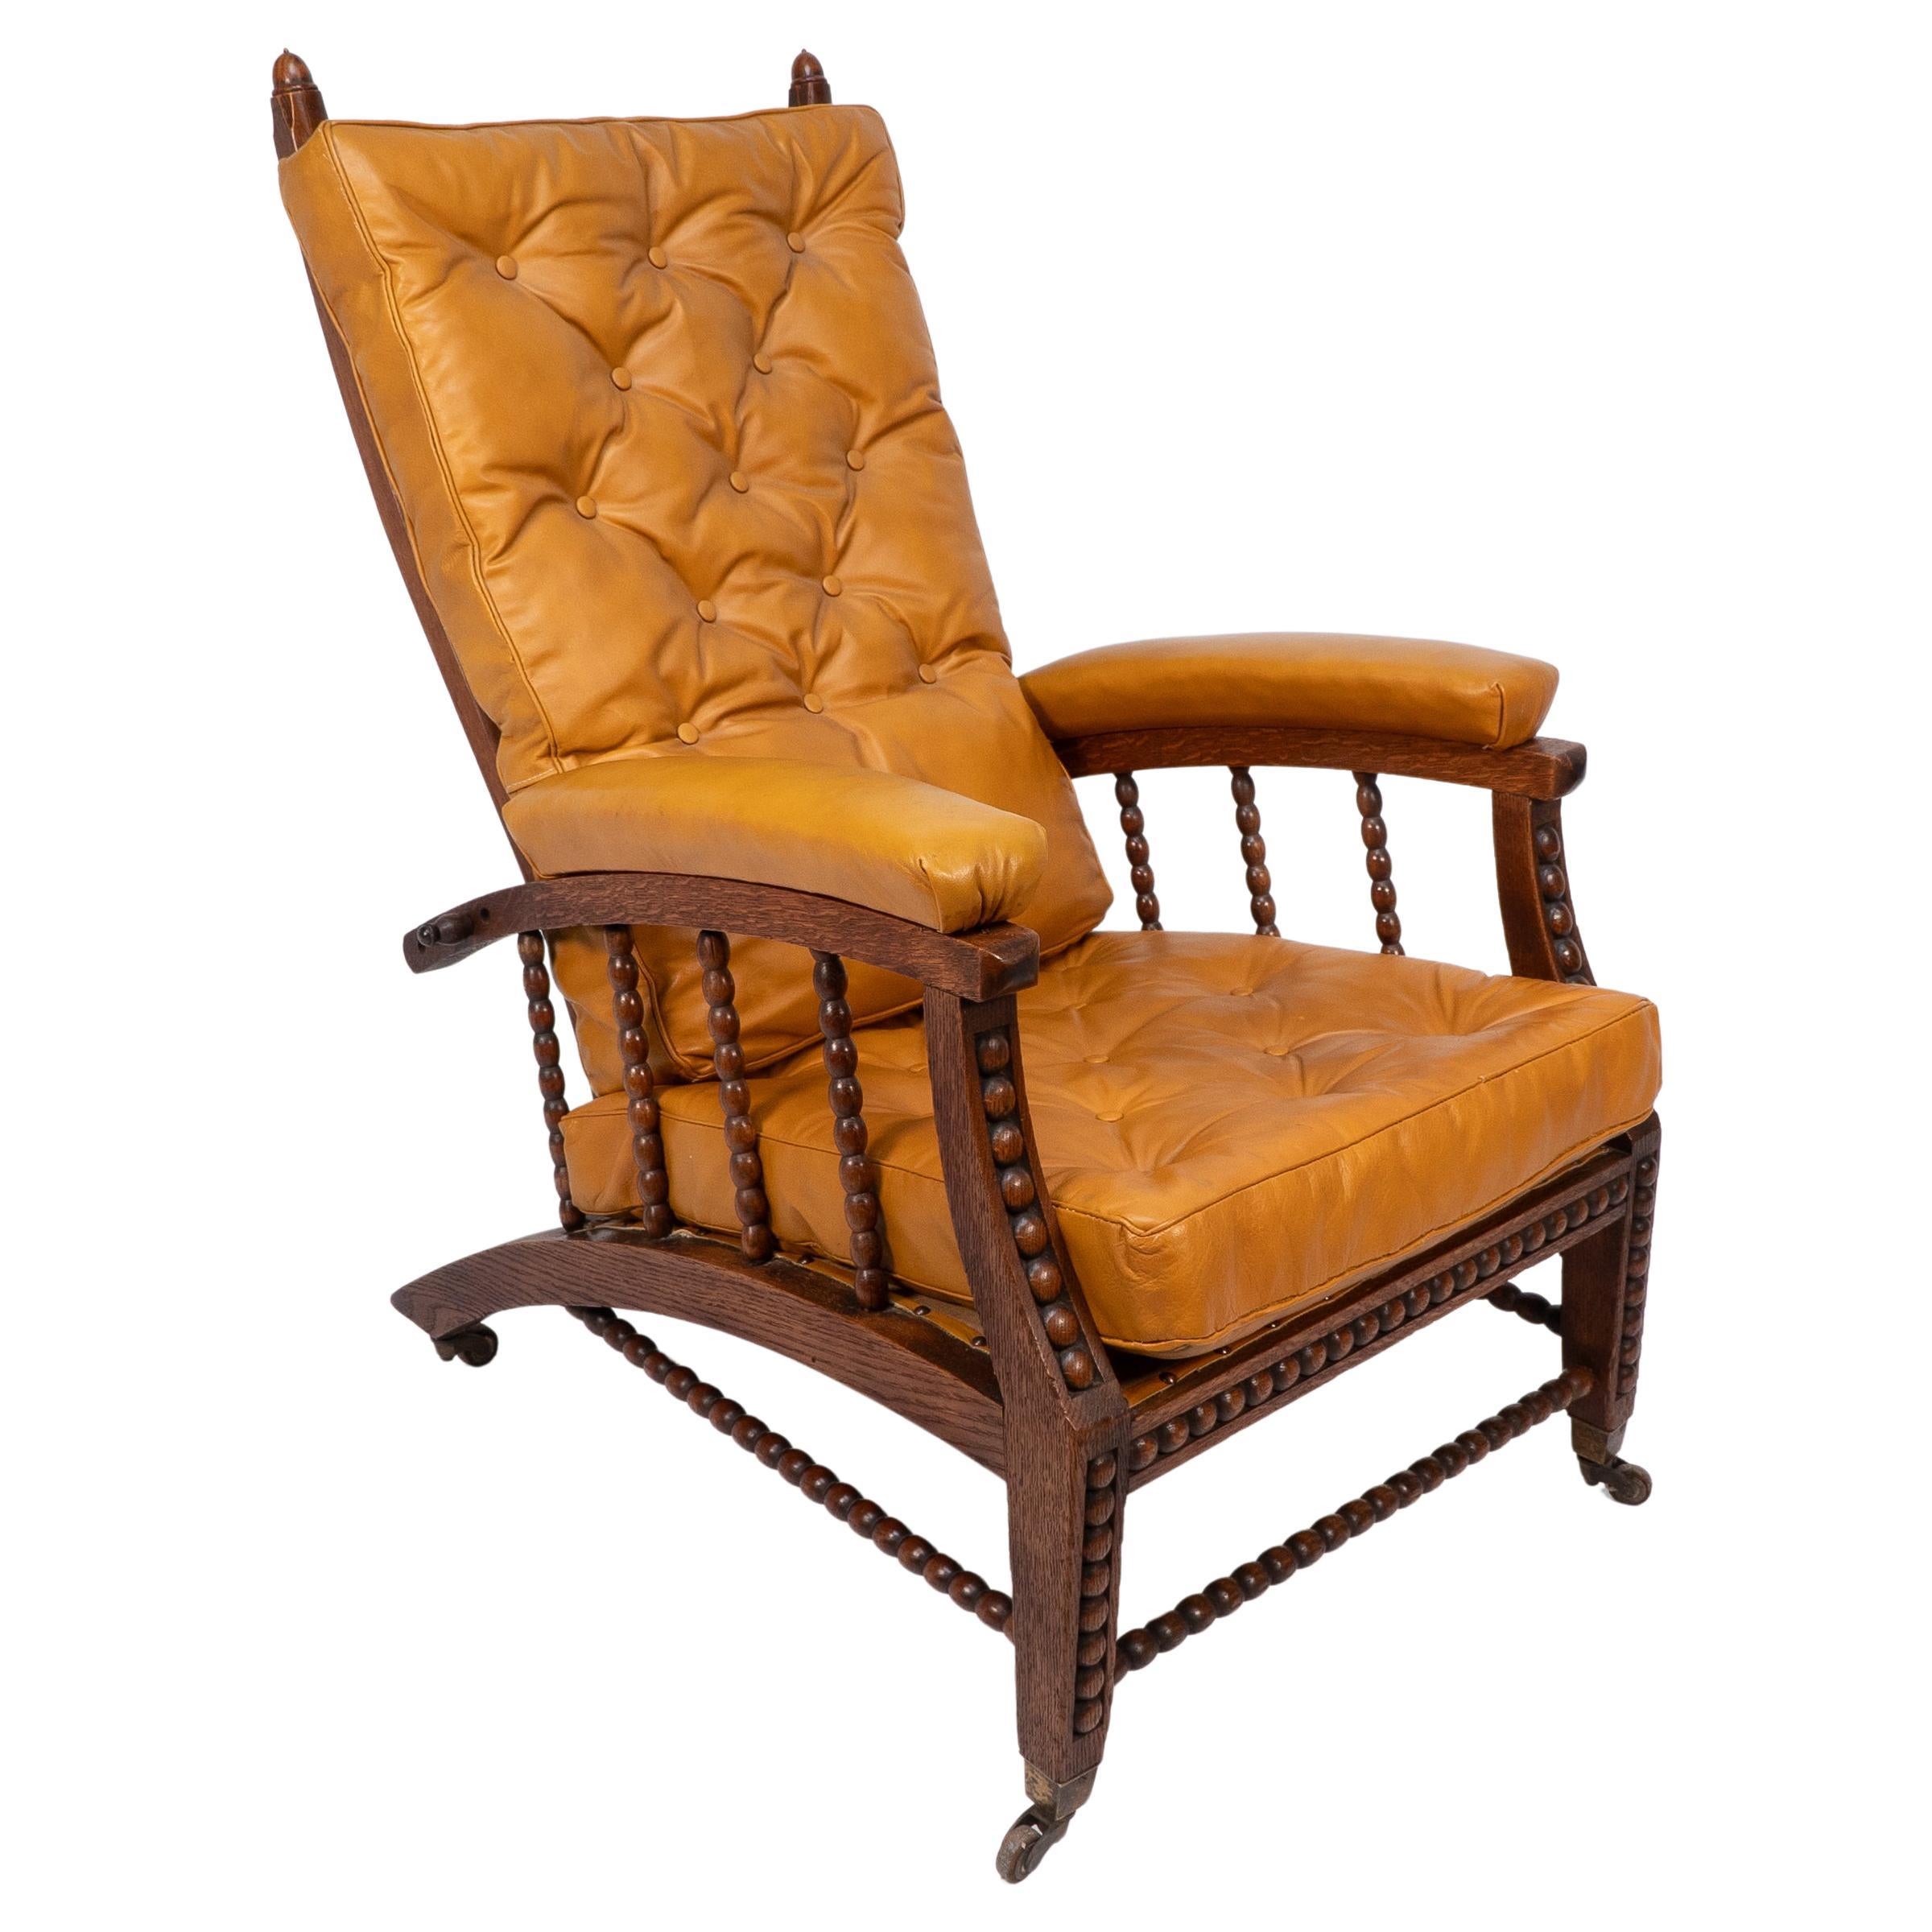 Phillip Webb for Morris & Co. English Aesthetic Movement oak reclining armchair For Sale